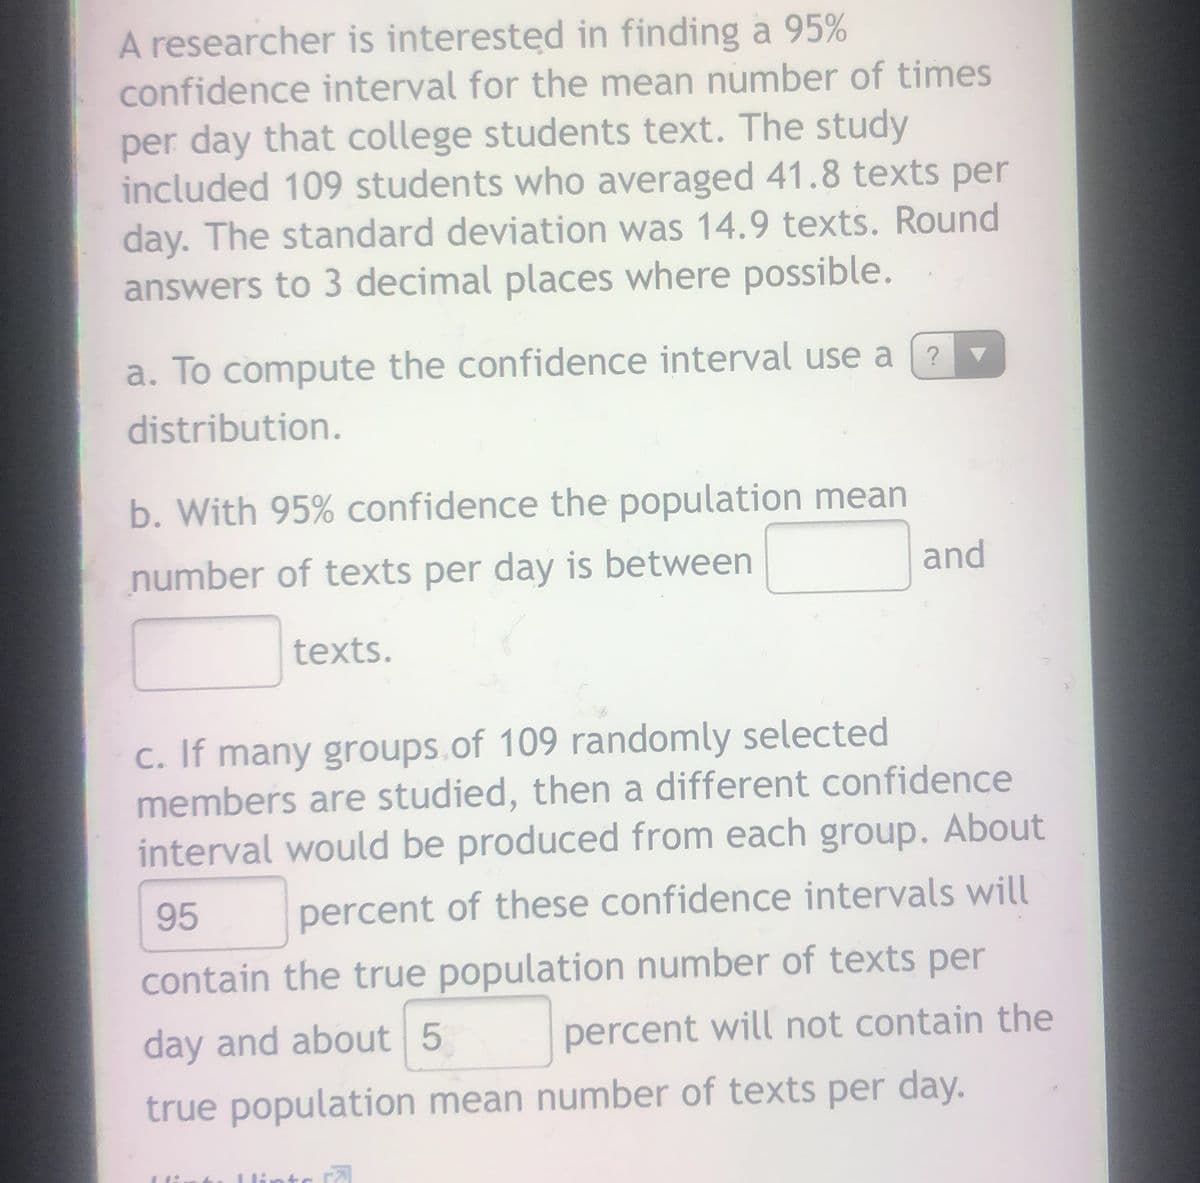 A researcher is interested in finding a 95%
confidence interval for the mean number of times
per day that college students text. The study
included 109 students who averaged 41.8 texts per
day. The standard deviation was 14.9 texts. Round
answers to 3 decimal places where possible.
a. To compute the confidence interval use a
?
distribution.
b. With 95% confidence the population mean
number of texts per day is between
and
texts.
c. If many groups.of 109 randomly selected
members are studied, then a different confidence
interval would be produced from each group. About
95 percent of these confidence intervals will
contain the true population number of texts per
day and about 5
percent will not contain the
true population mean number of texts per day.
